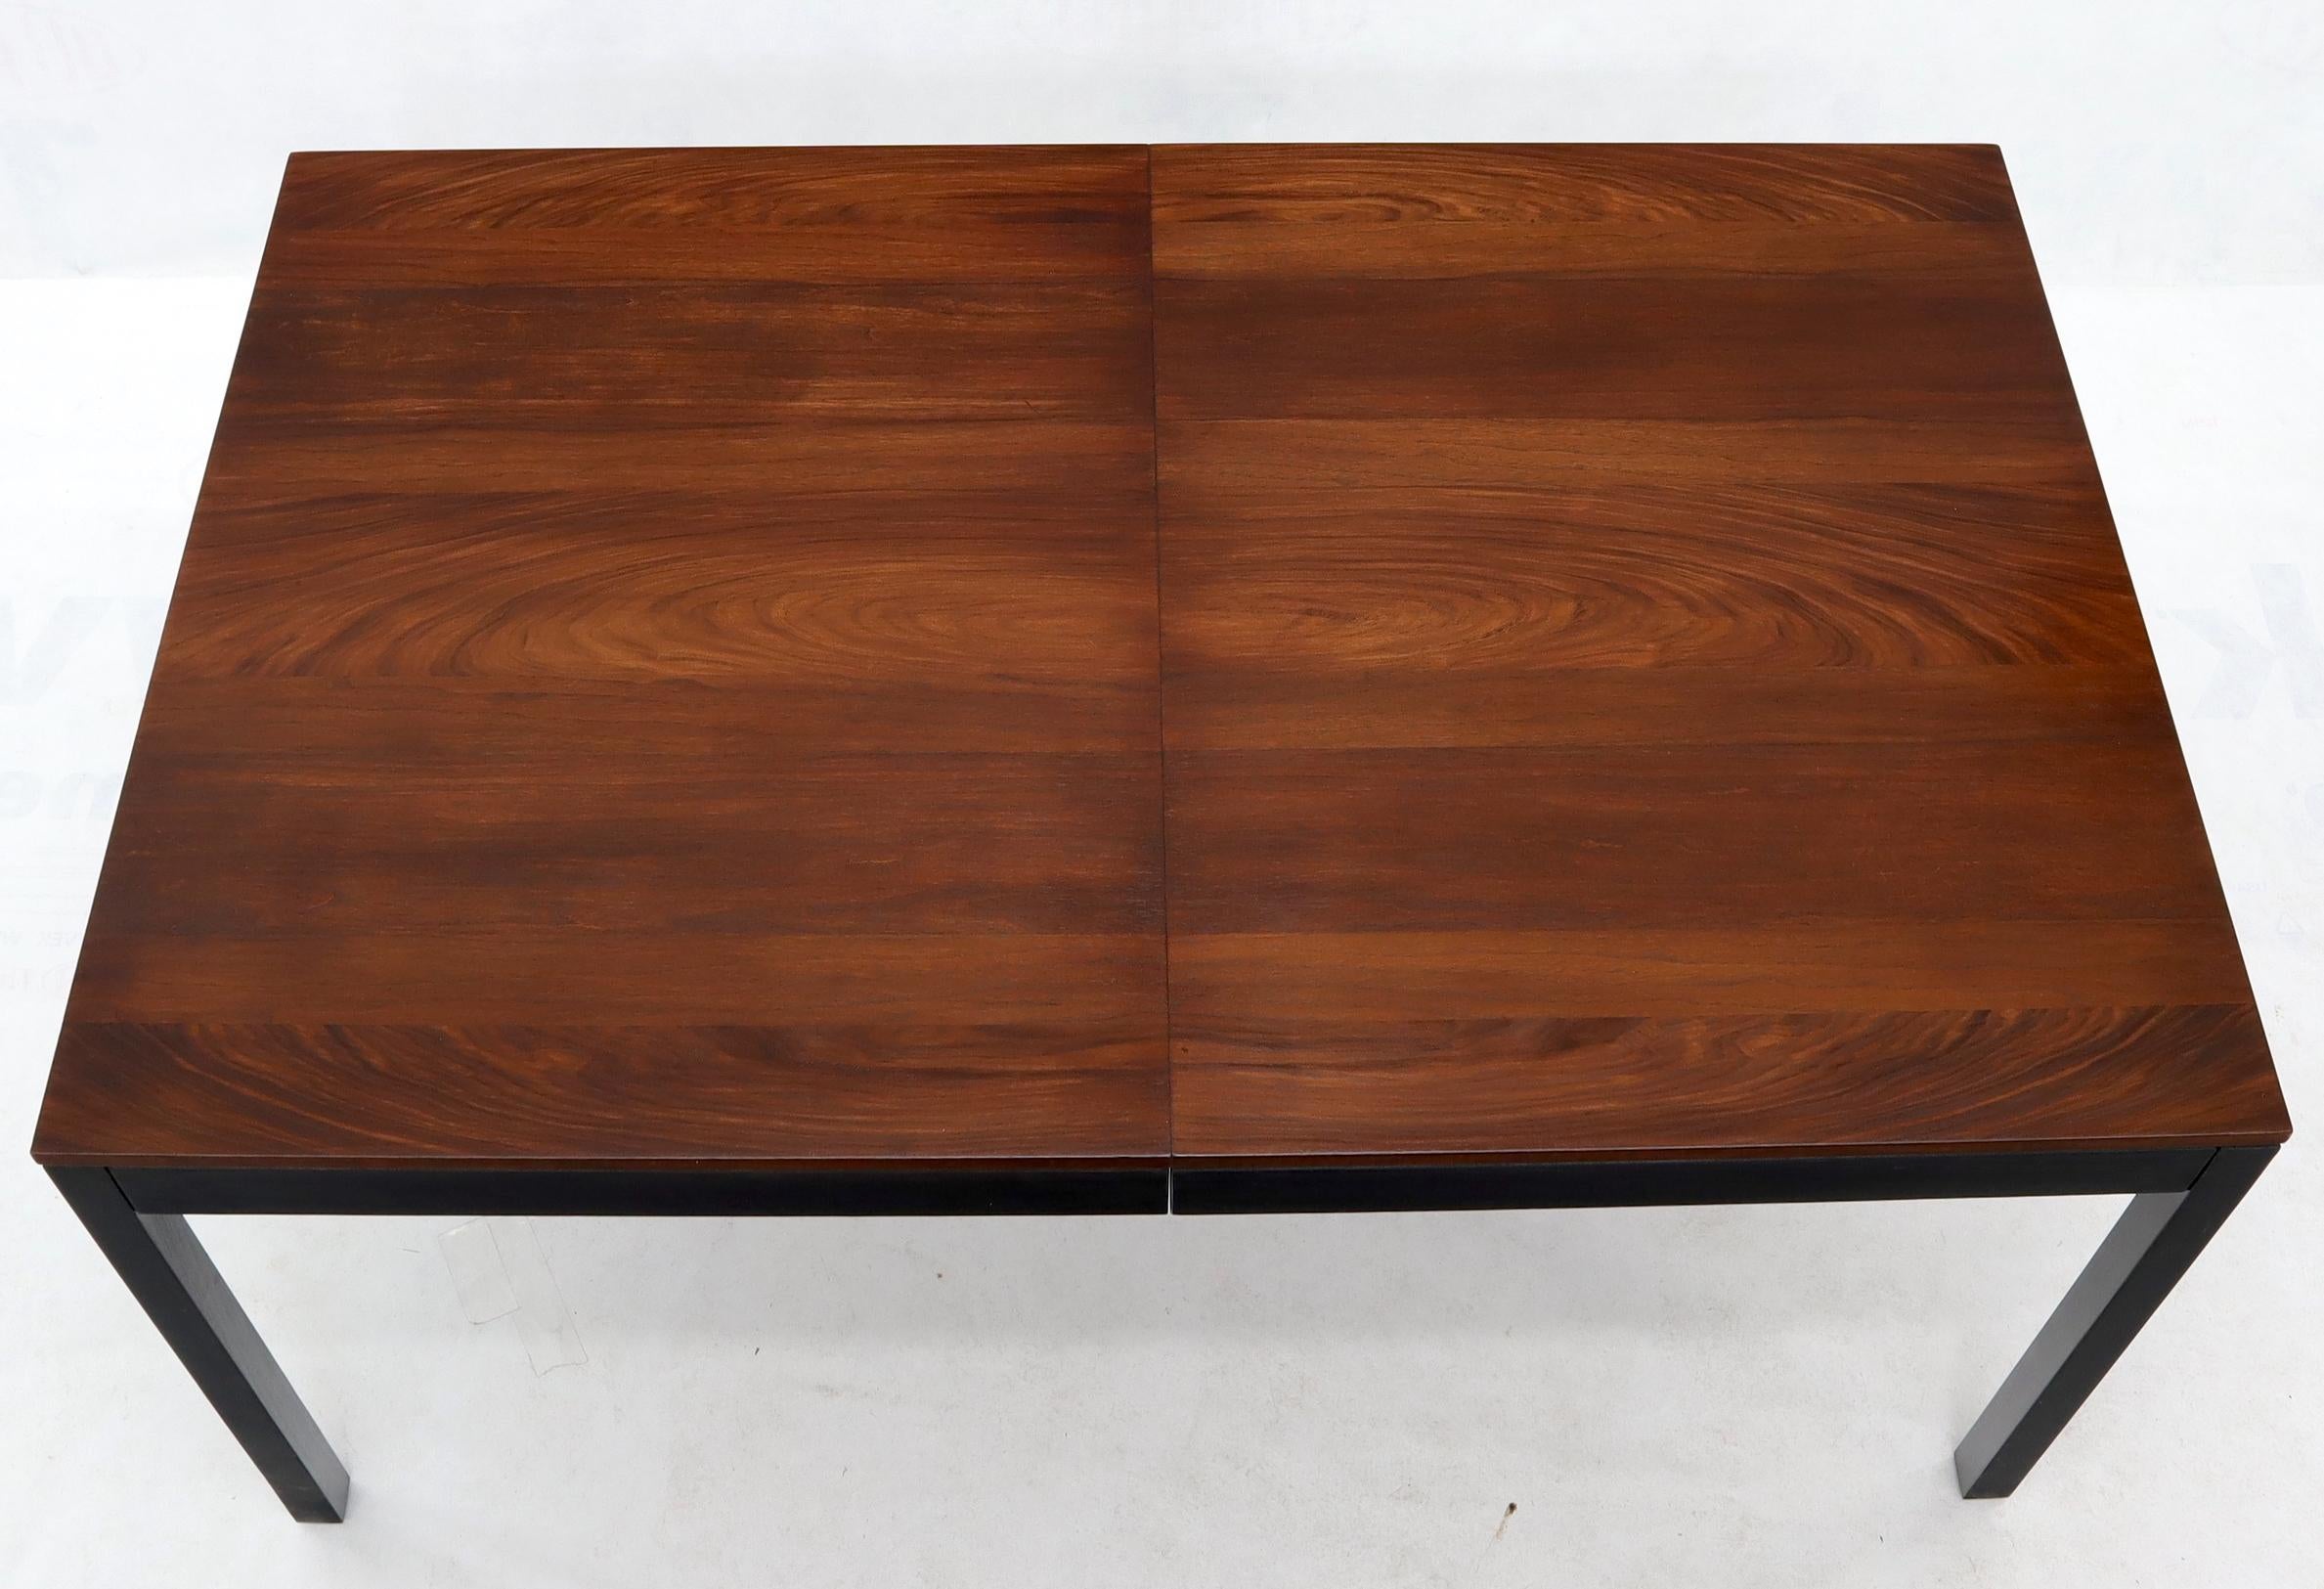 20th Century Mid-Century Modern Mixed Woods Top Dining Table with 2 Leaves